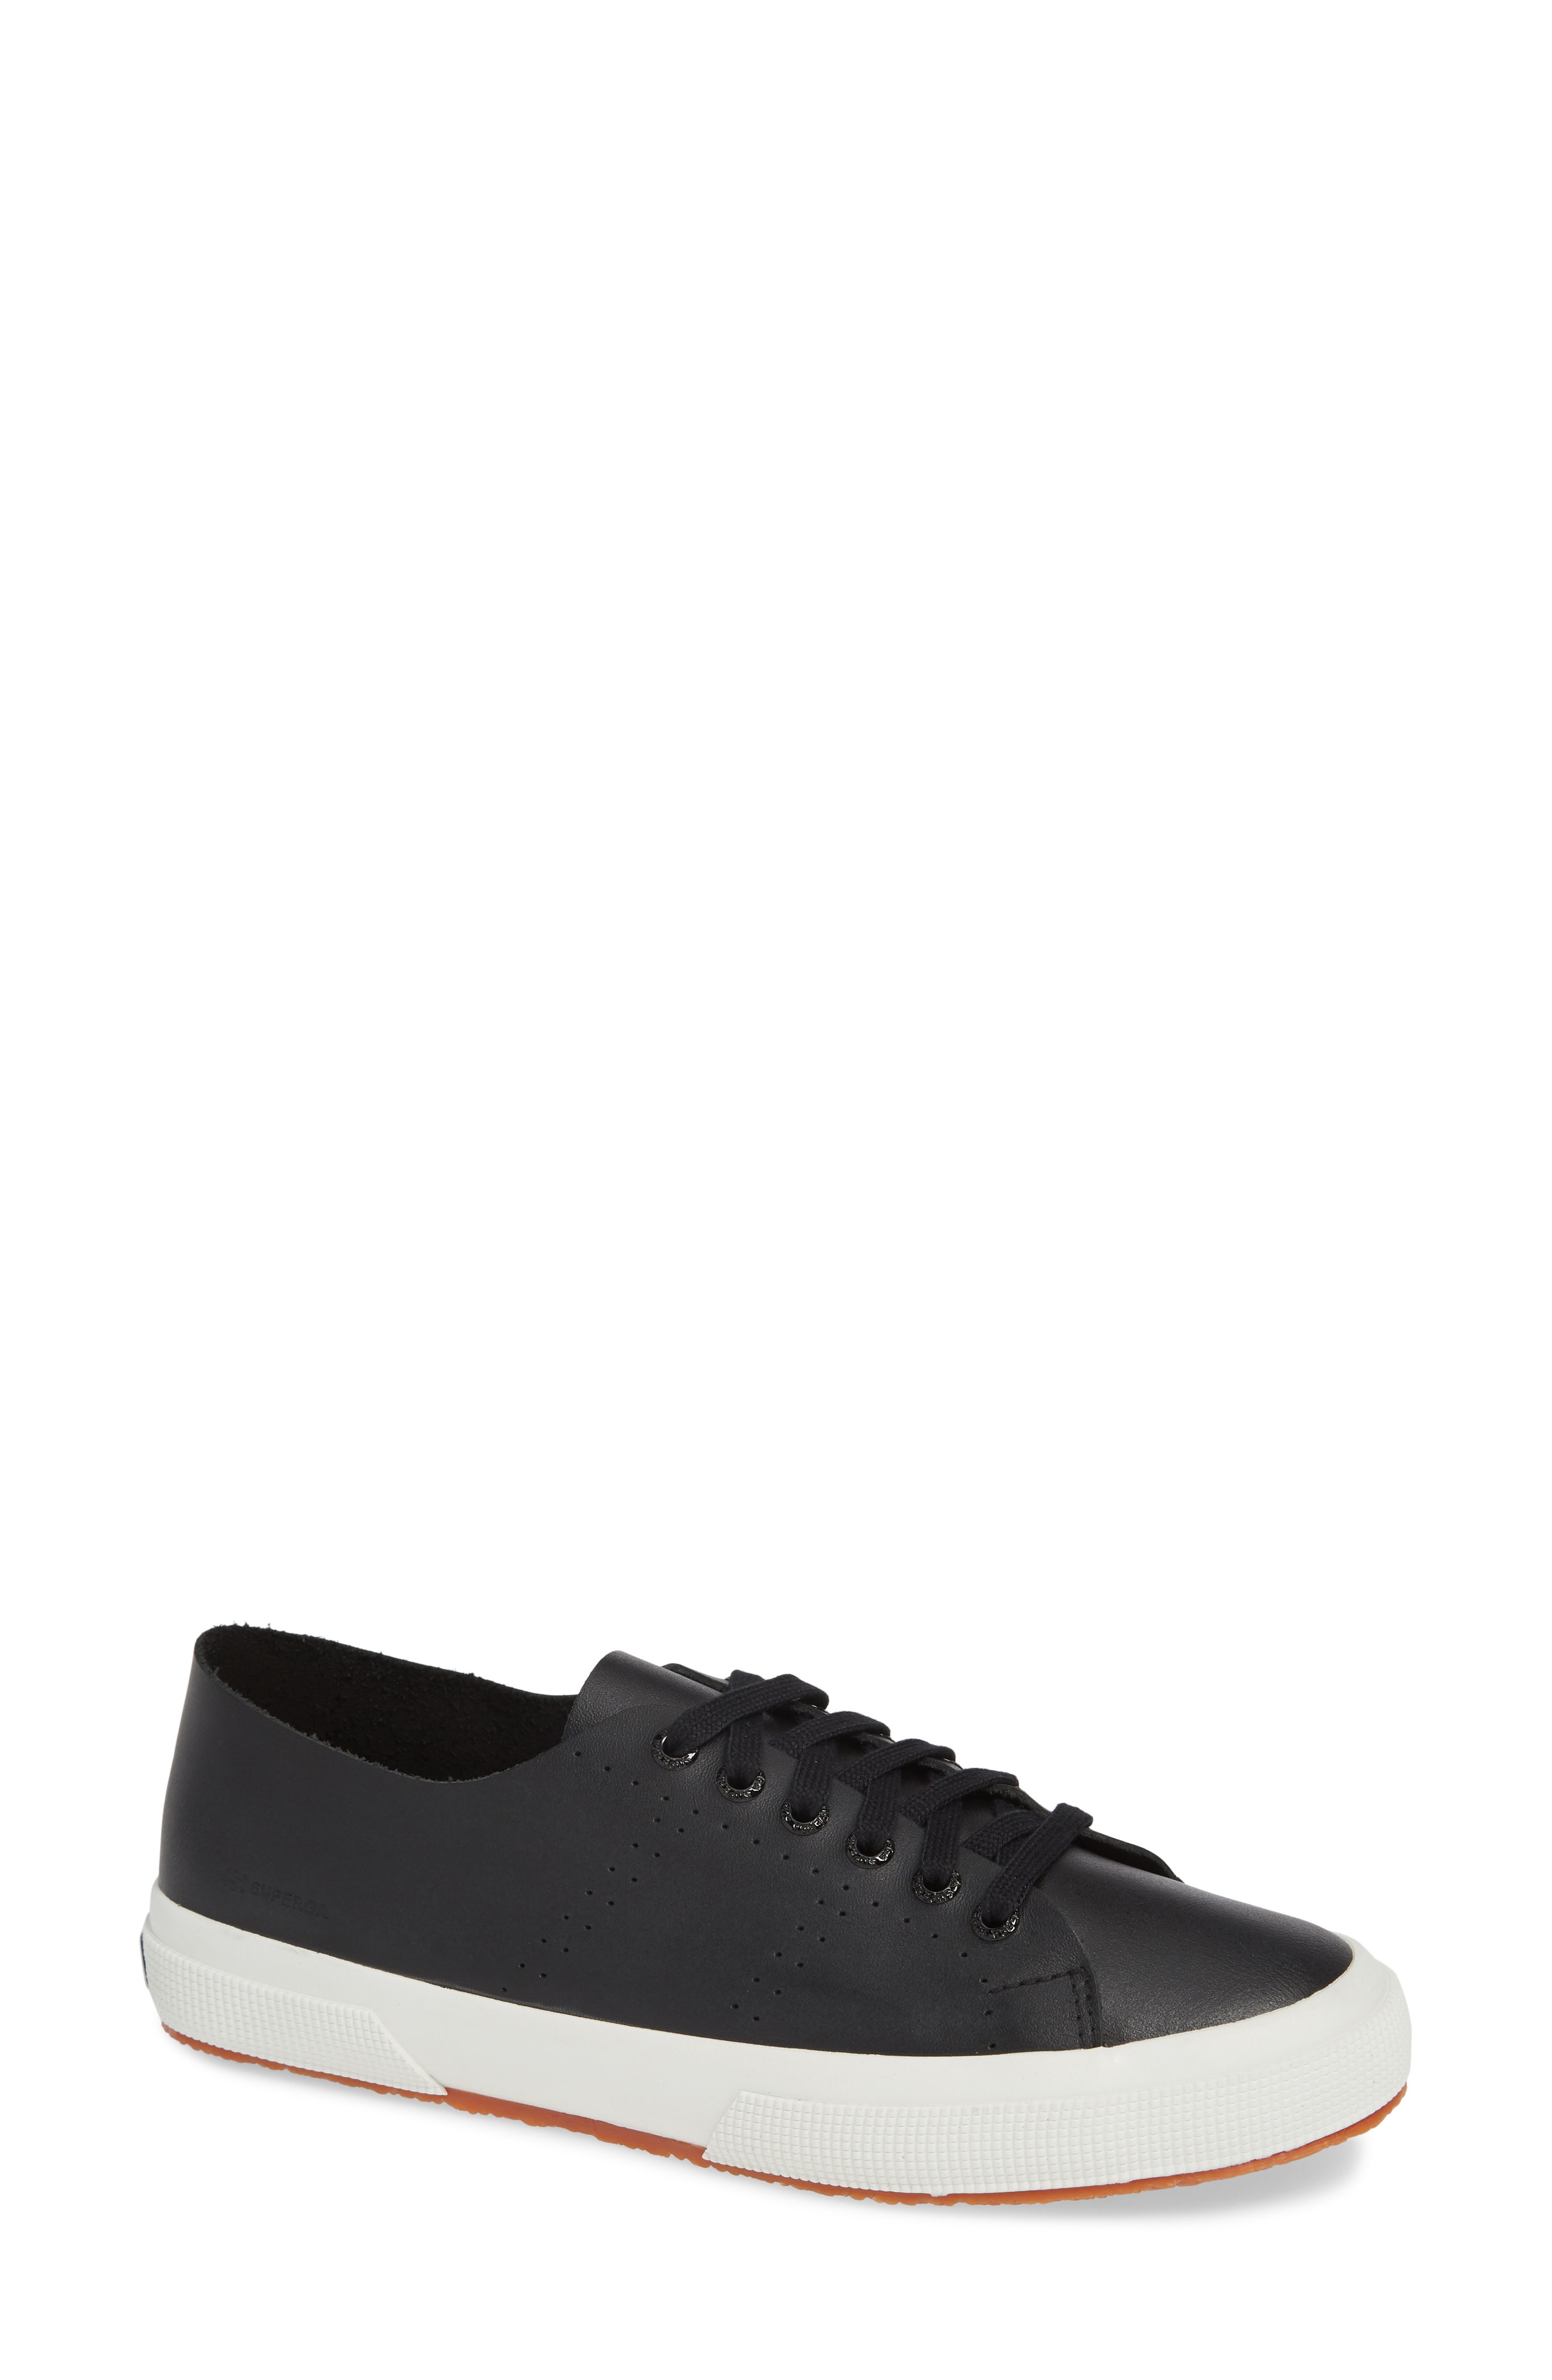 Superga Shoes & Sneakers | Nordstrom